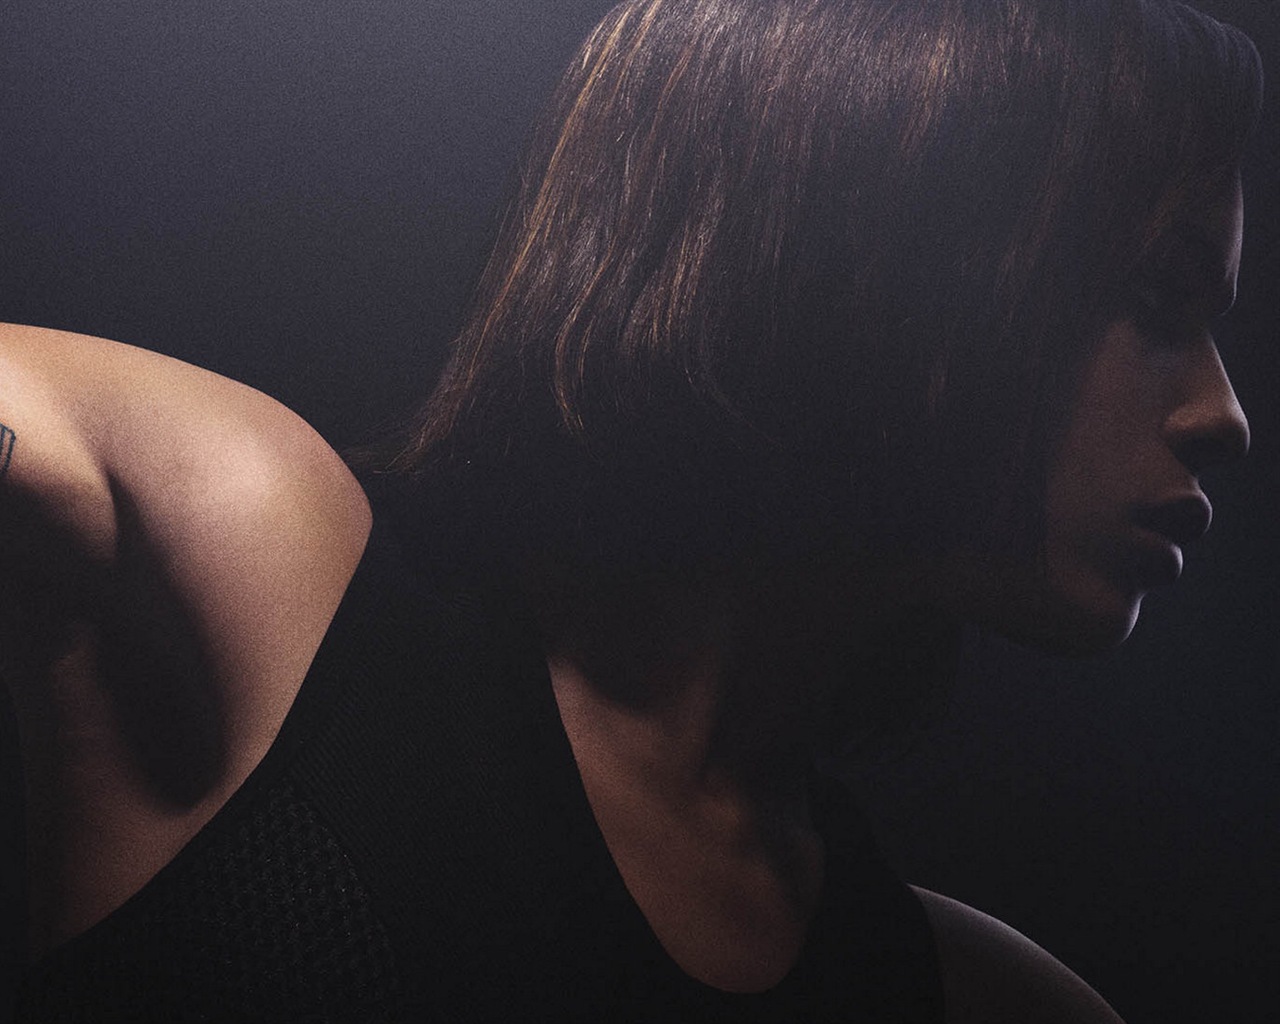 Divergent movie HD wallpapers #8 - 1280x1024